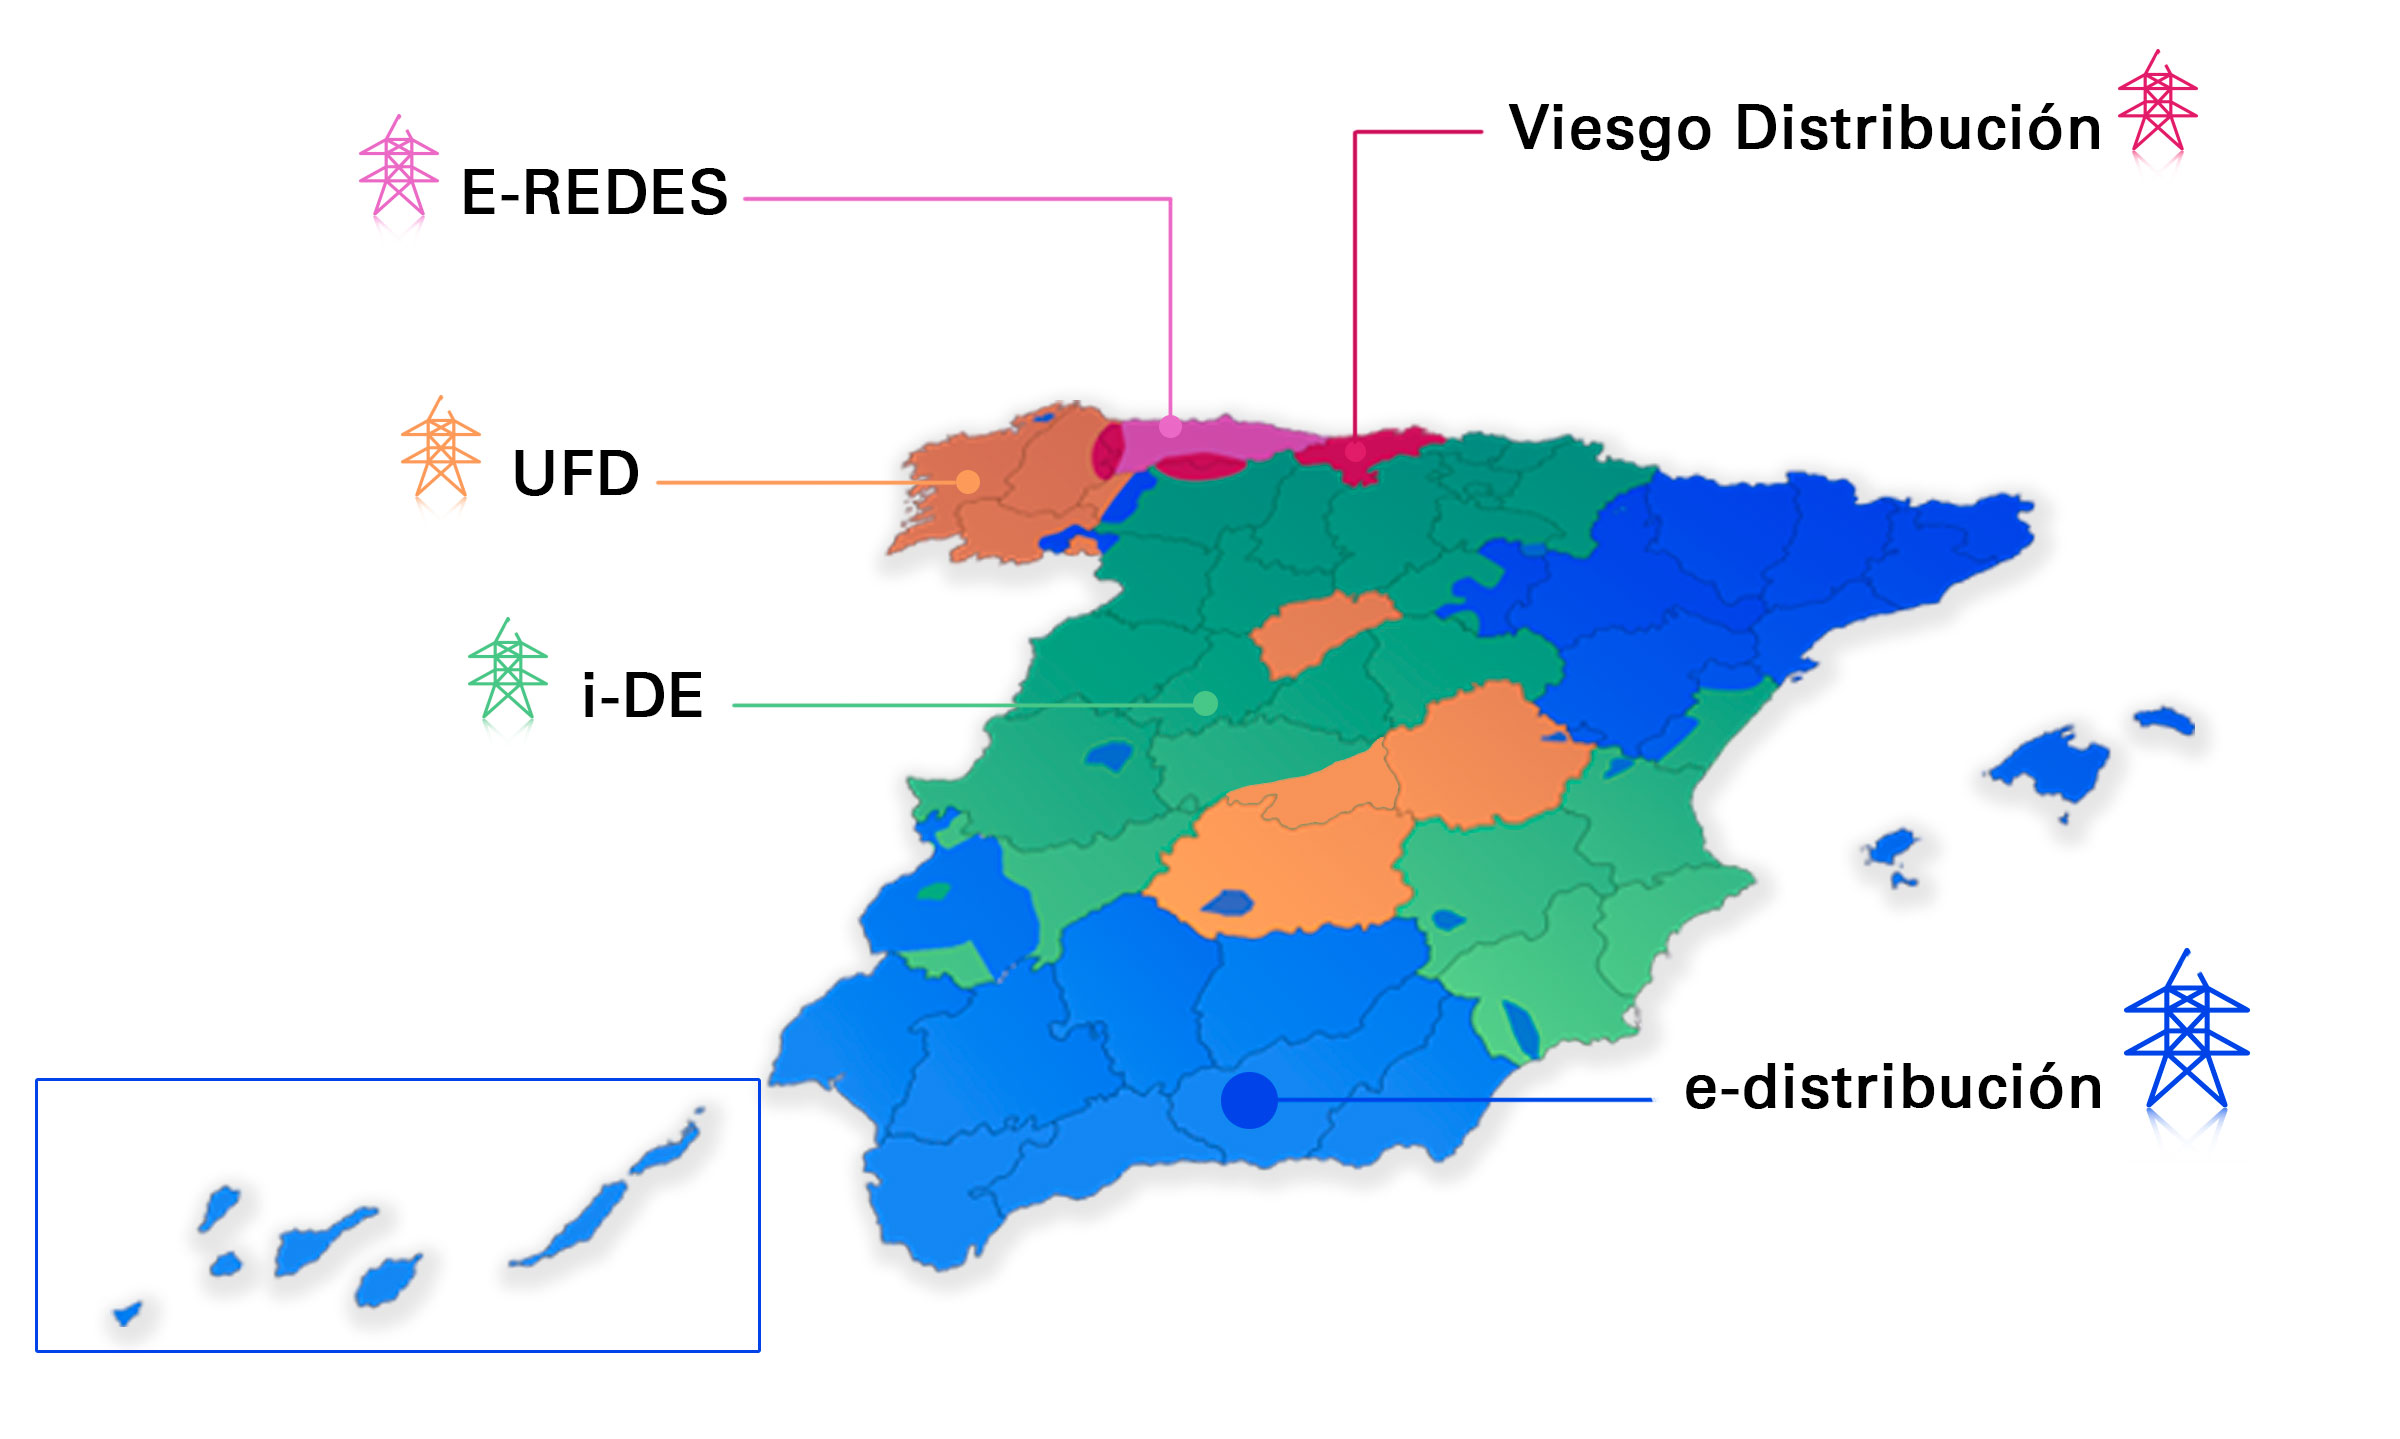 Map of Spain with the zone for each electricity distributor. The information is then explained afterwards in text.